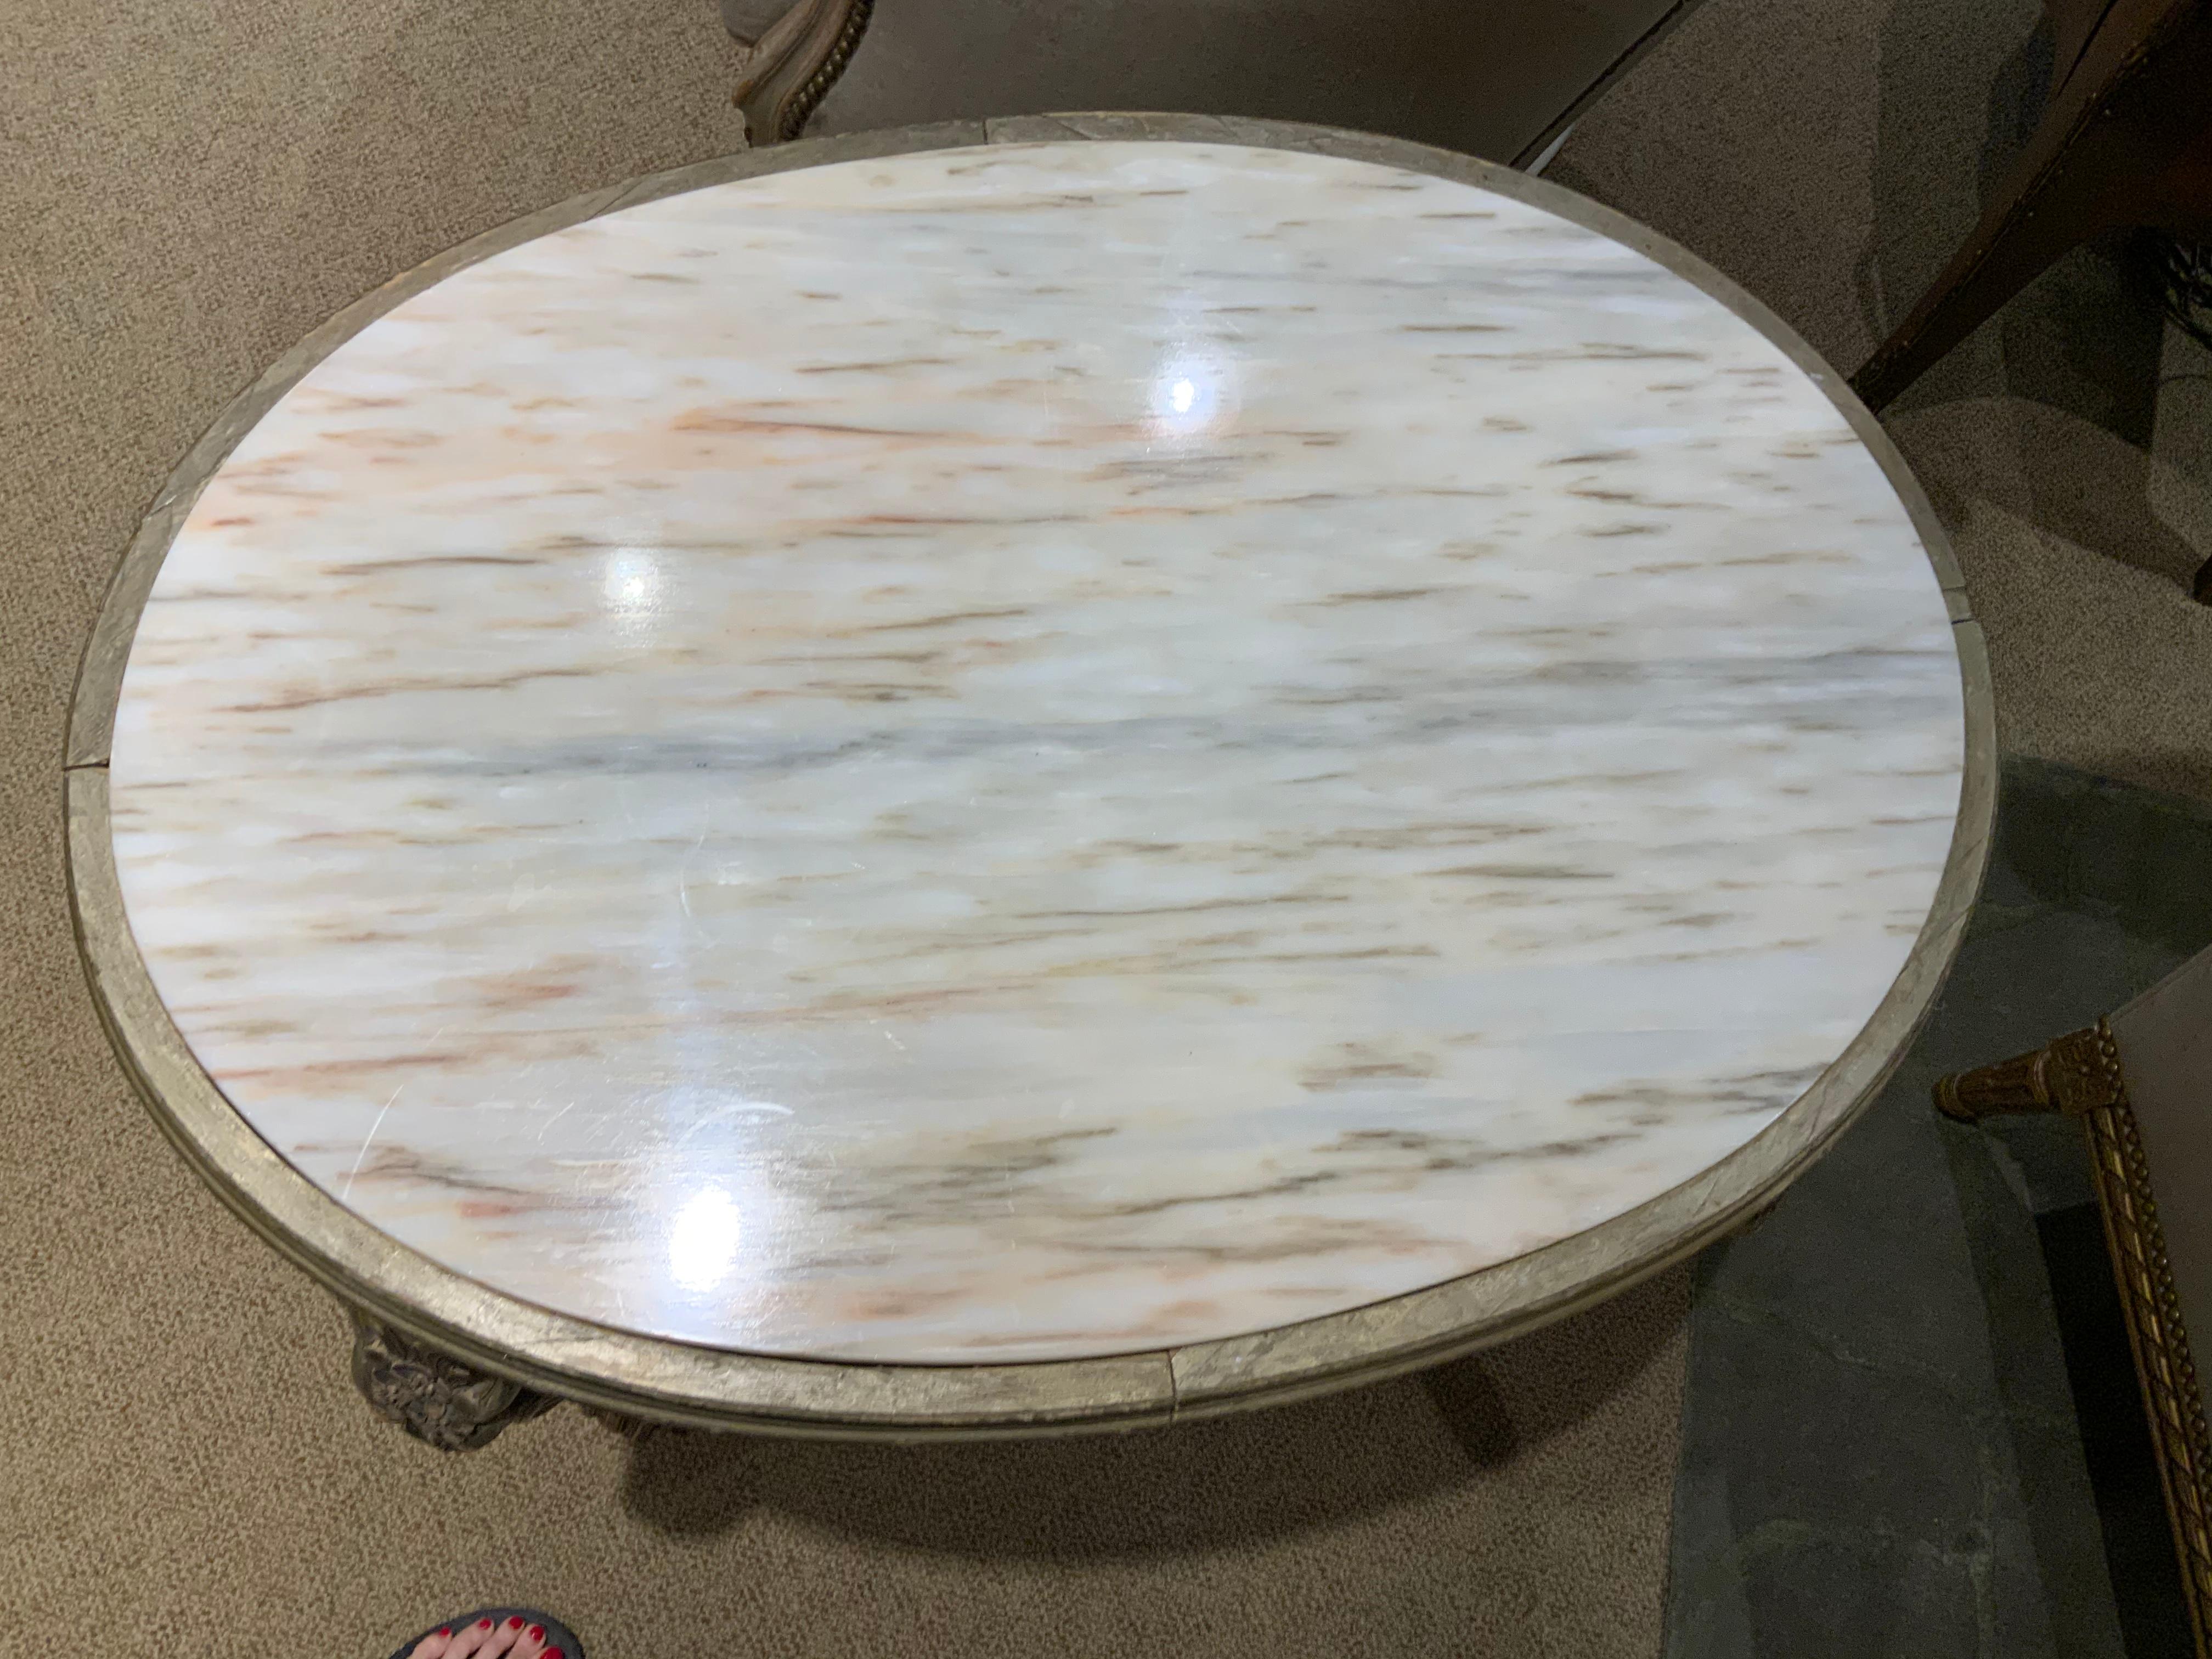 Oval Venetian Carved and Polychrome Table with a Cream, Gold and Pale Gray Veins In Good Condition For Sale In Houston, TX